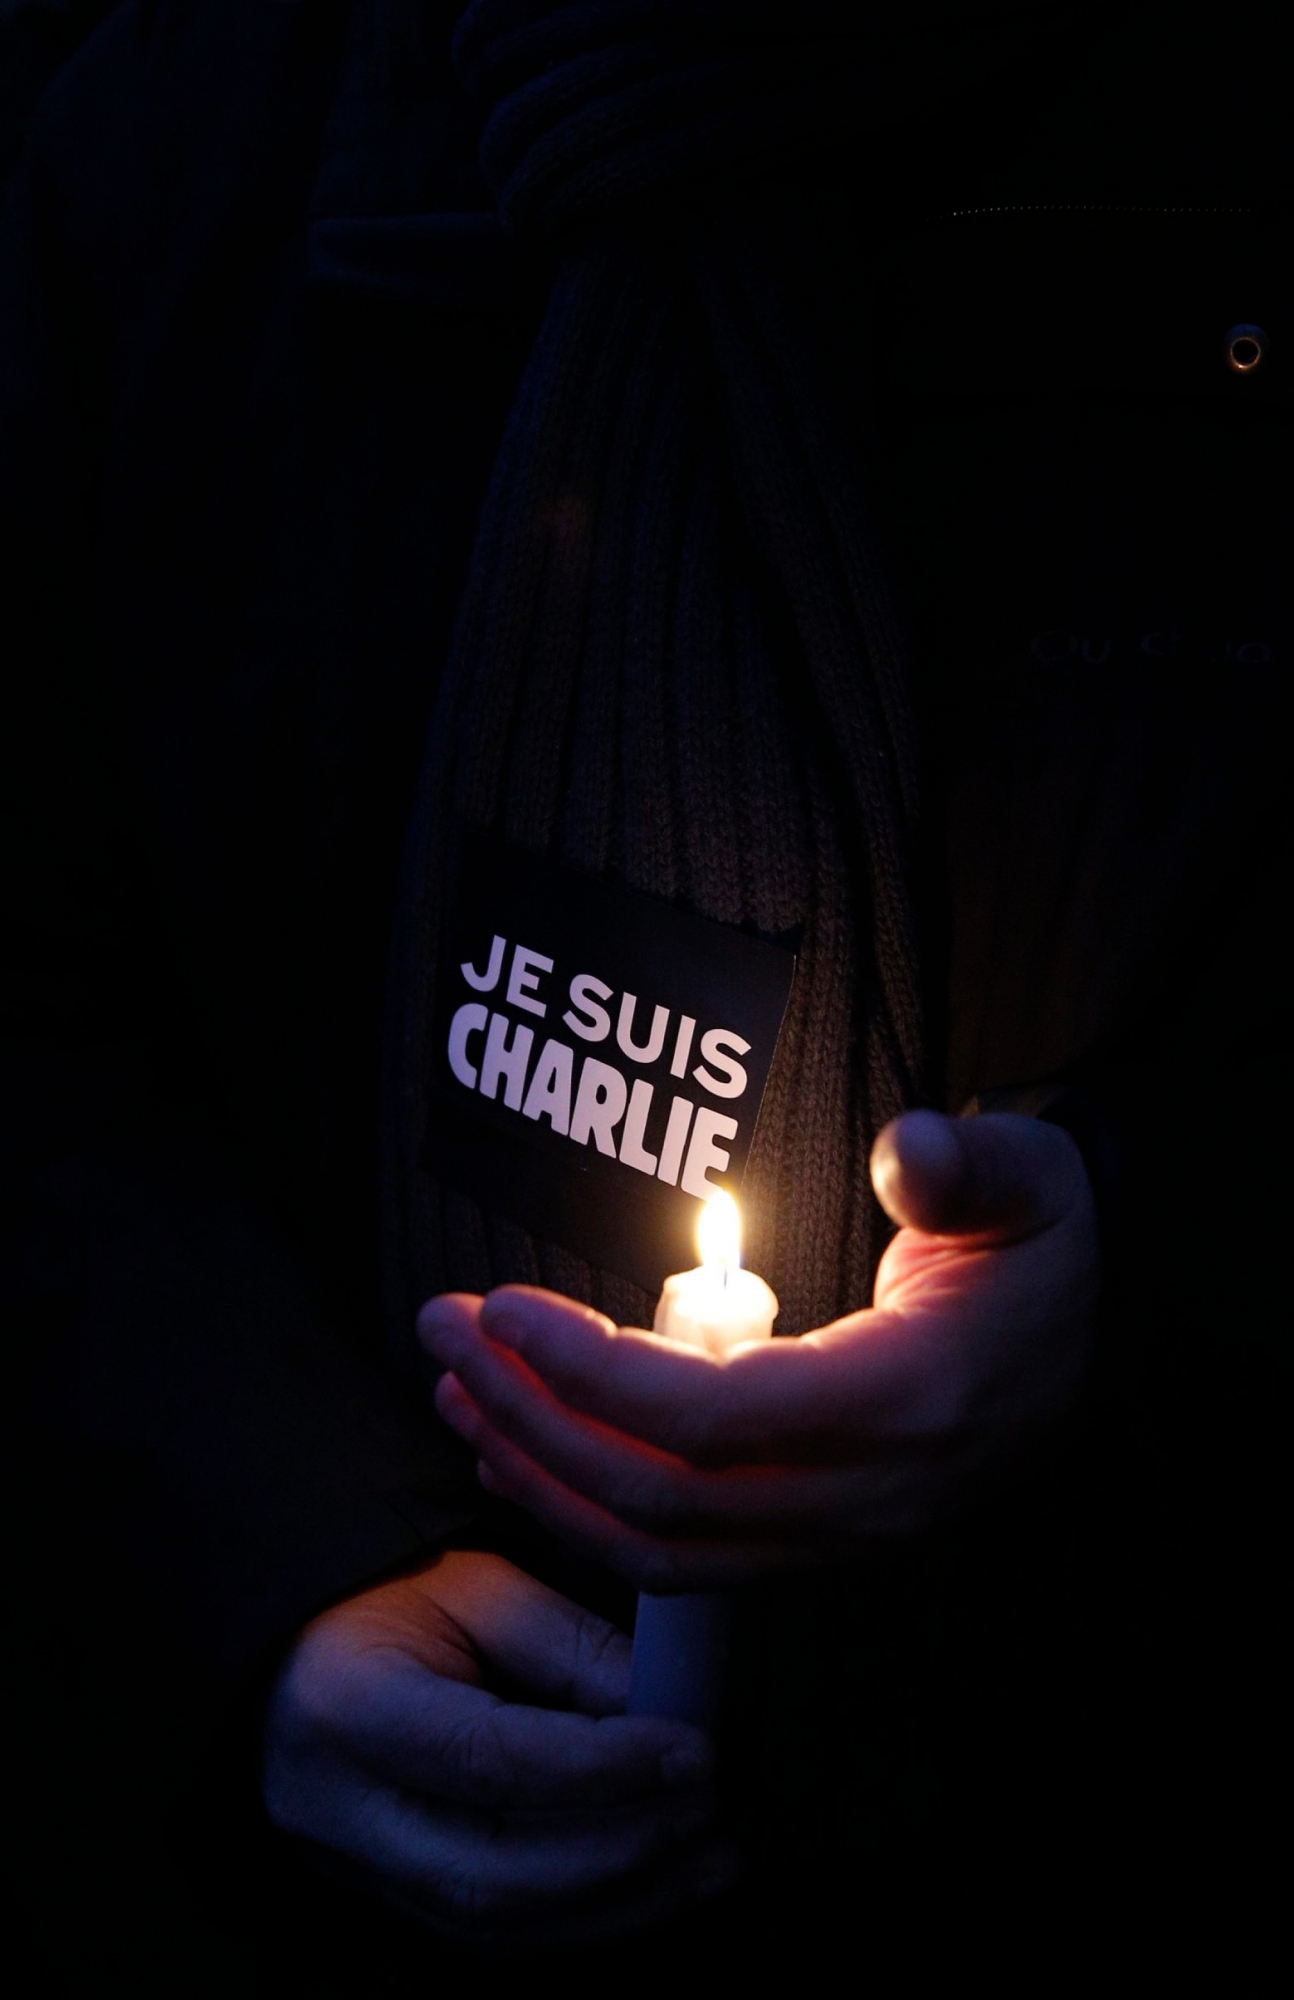 A man holds a candle and a sticker reading " I am Charlie", during a demonstration in Paris, Wednesday, Jan. 7, 2015. Three masked gunmen shouting "Allahu akbar!" stormed the Paris offices of a satirical newspaper, Charlie Hebdo, Wednesday, killing 12 people, including its editor, before escaping in a car. It was France's deadliest postwar terrorist attack. (AP Photo/Christophe Ena) APTOPIX France Newspaper Attack